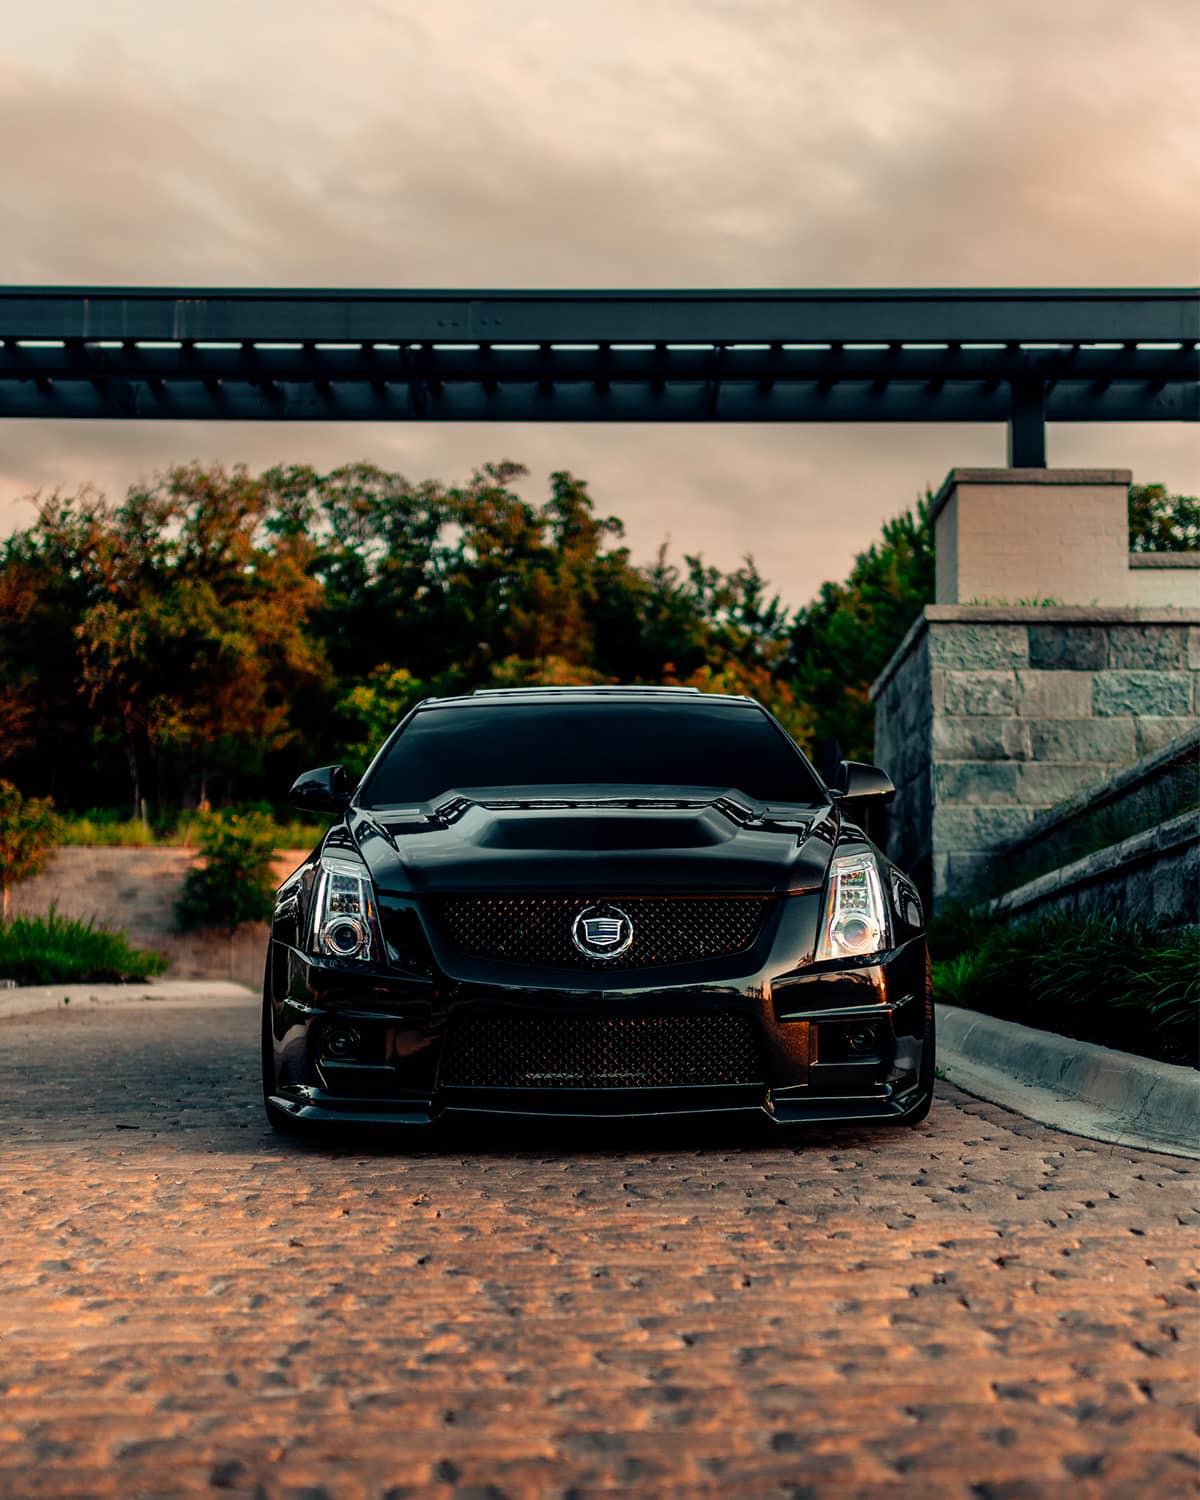 Gen 2 Cadillac CTS-V sedan with blacked out custom mesh grille, silver emblem and low stance